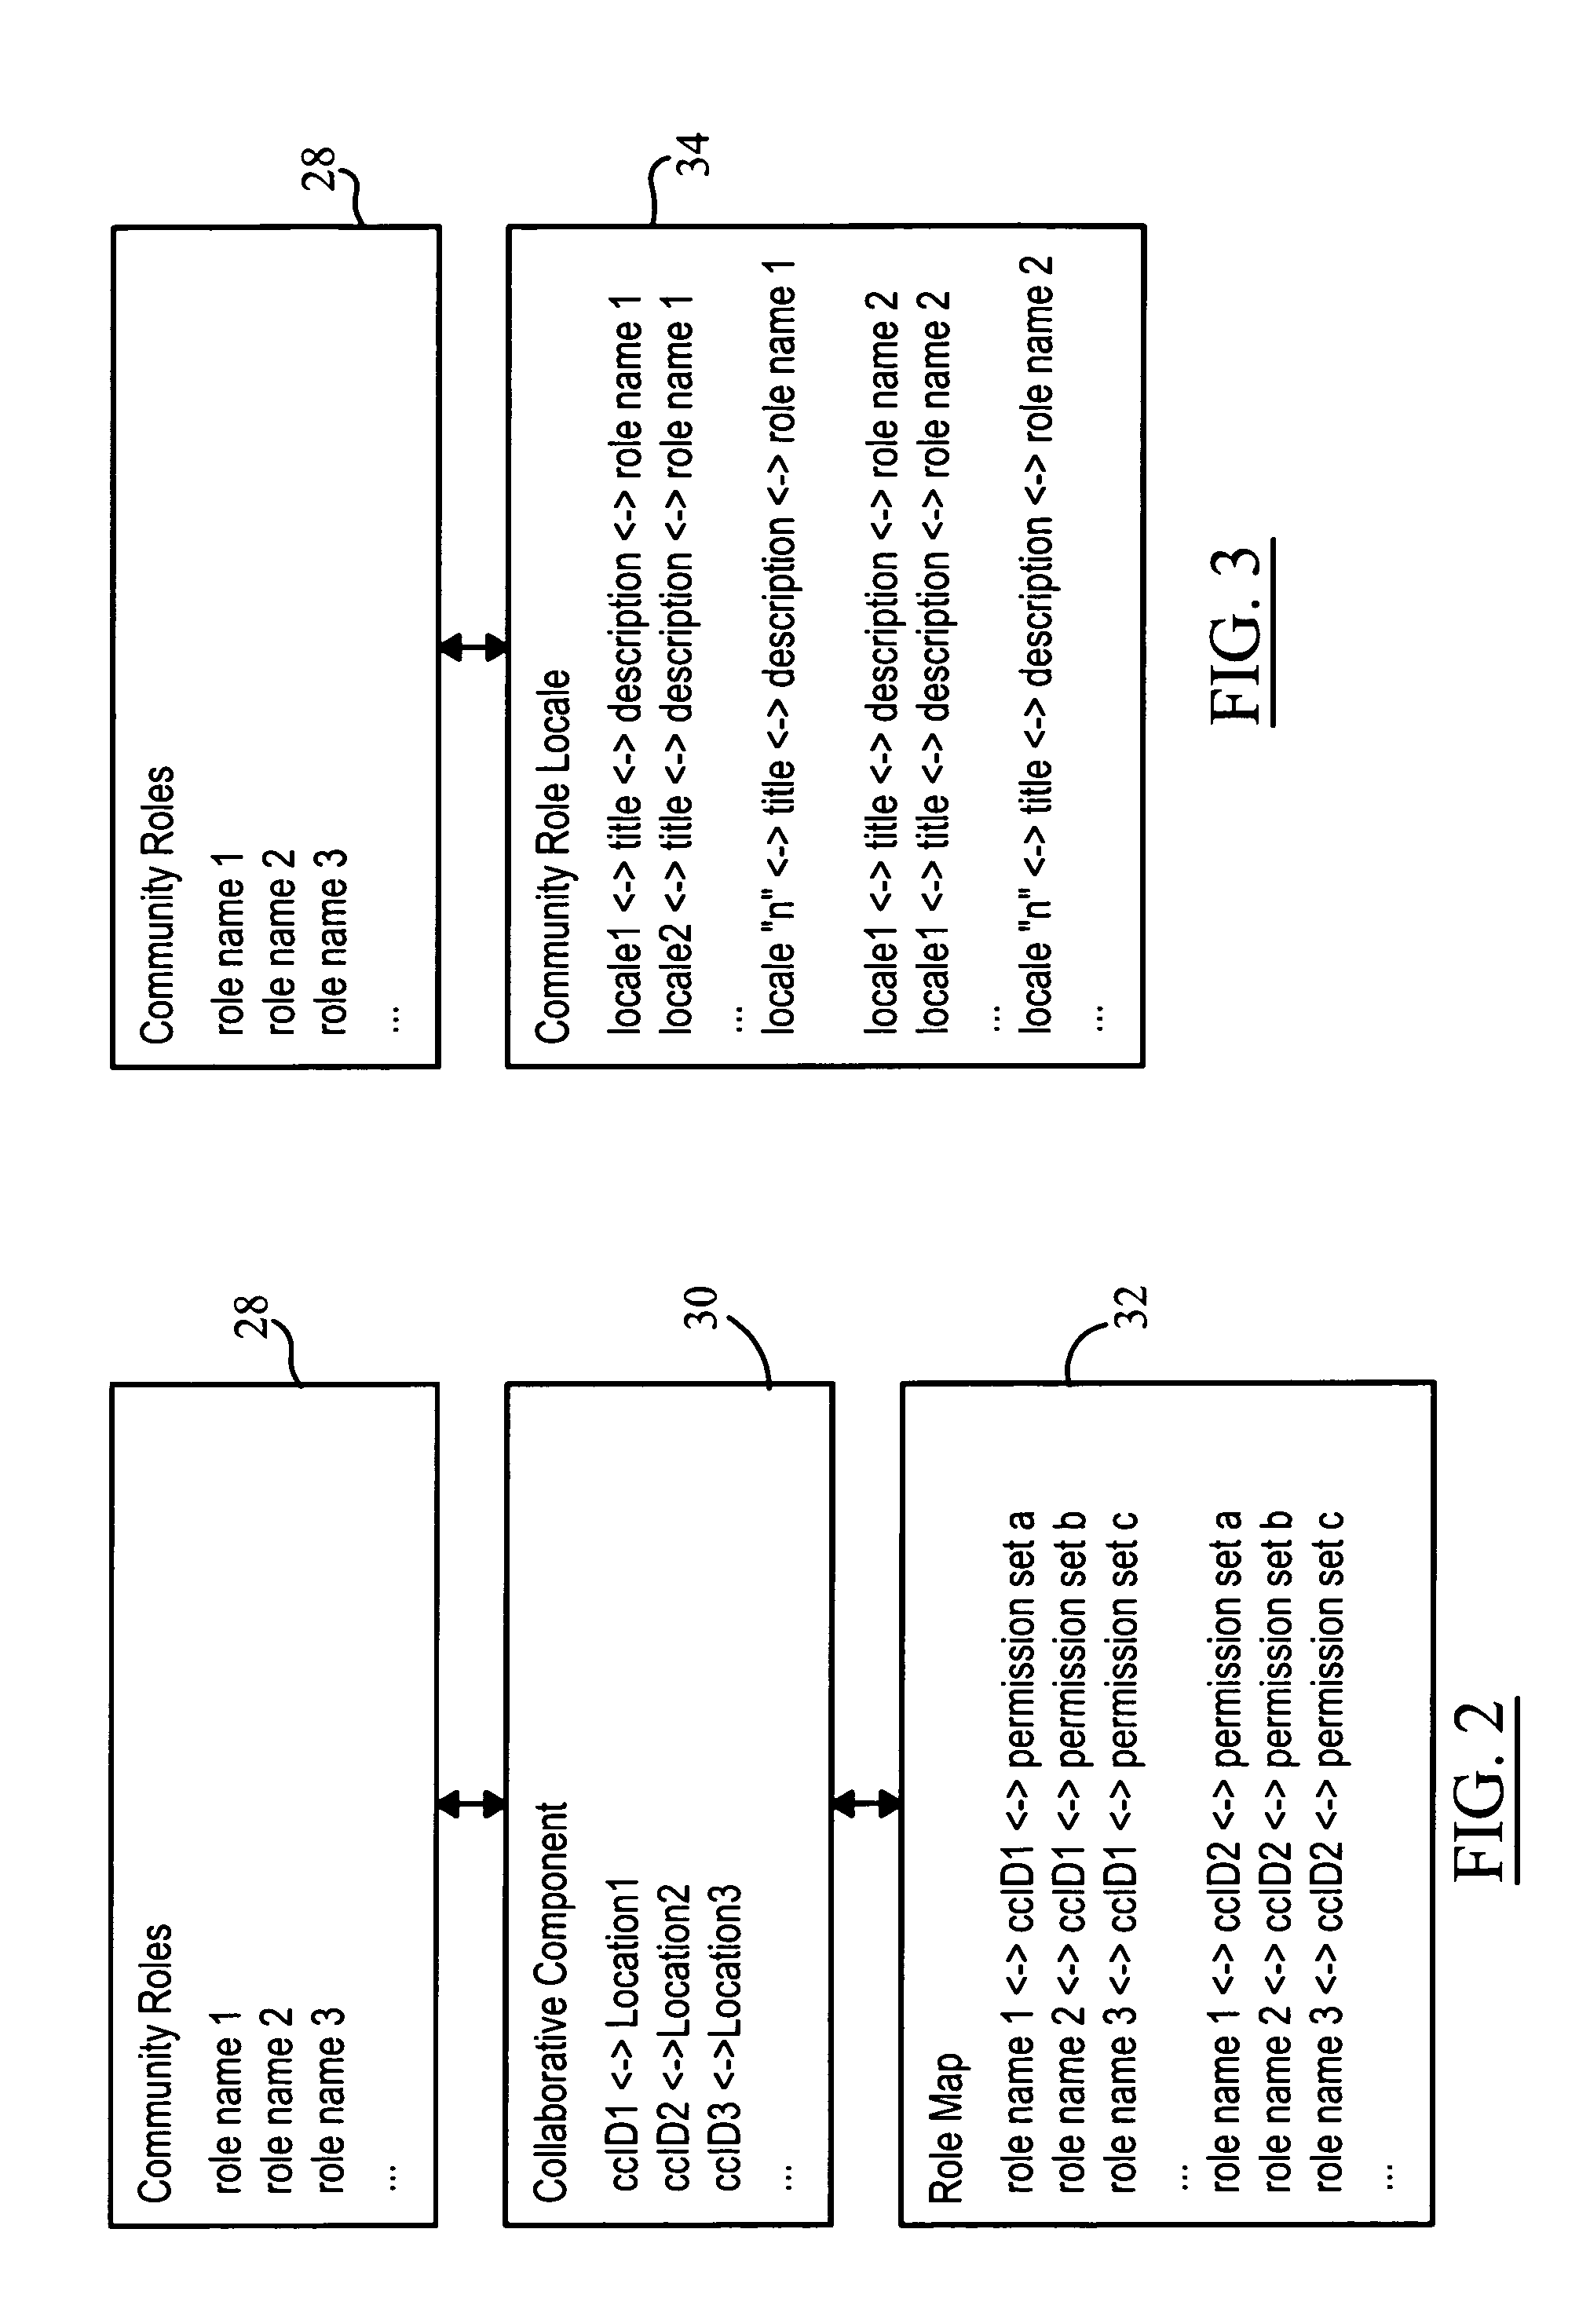 Method and system for an independent collaborative computing community